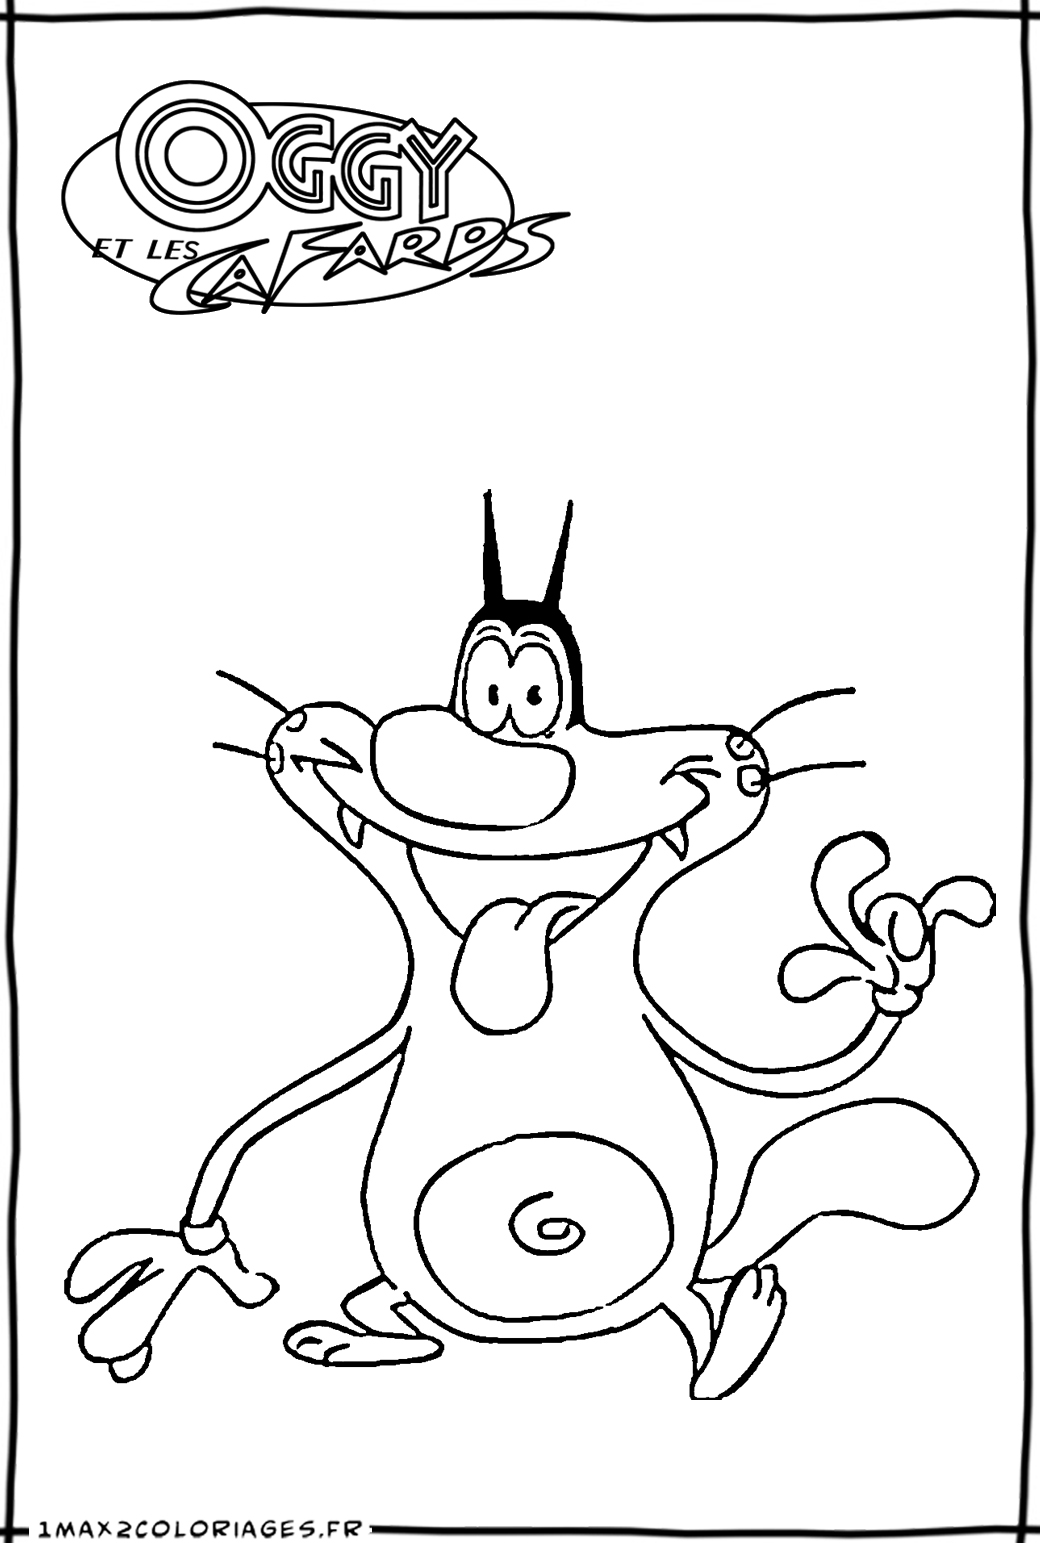 oggy and olivia coloring pages - photo #29